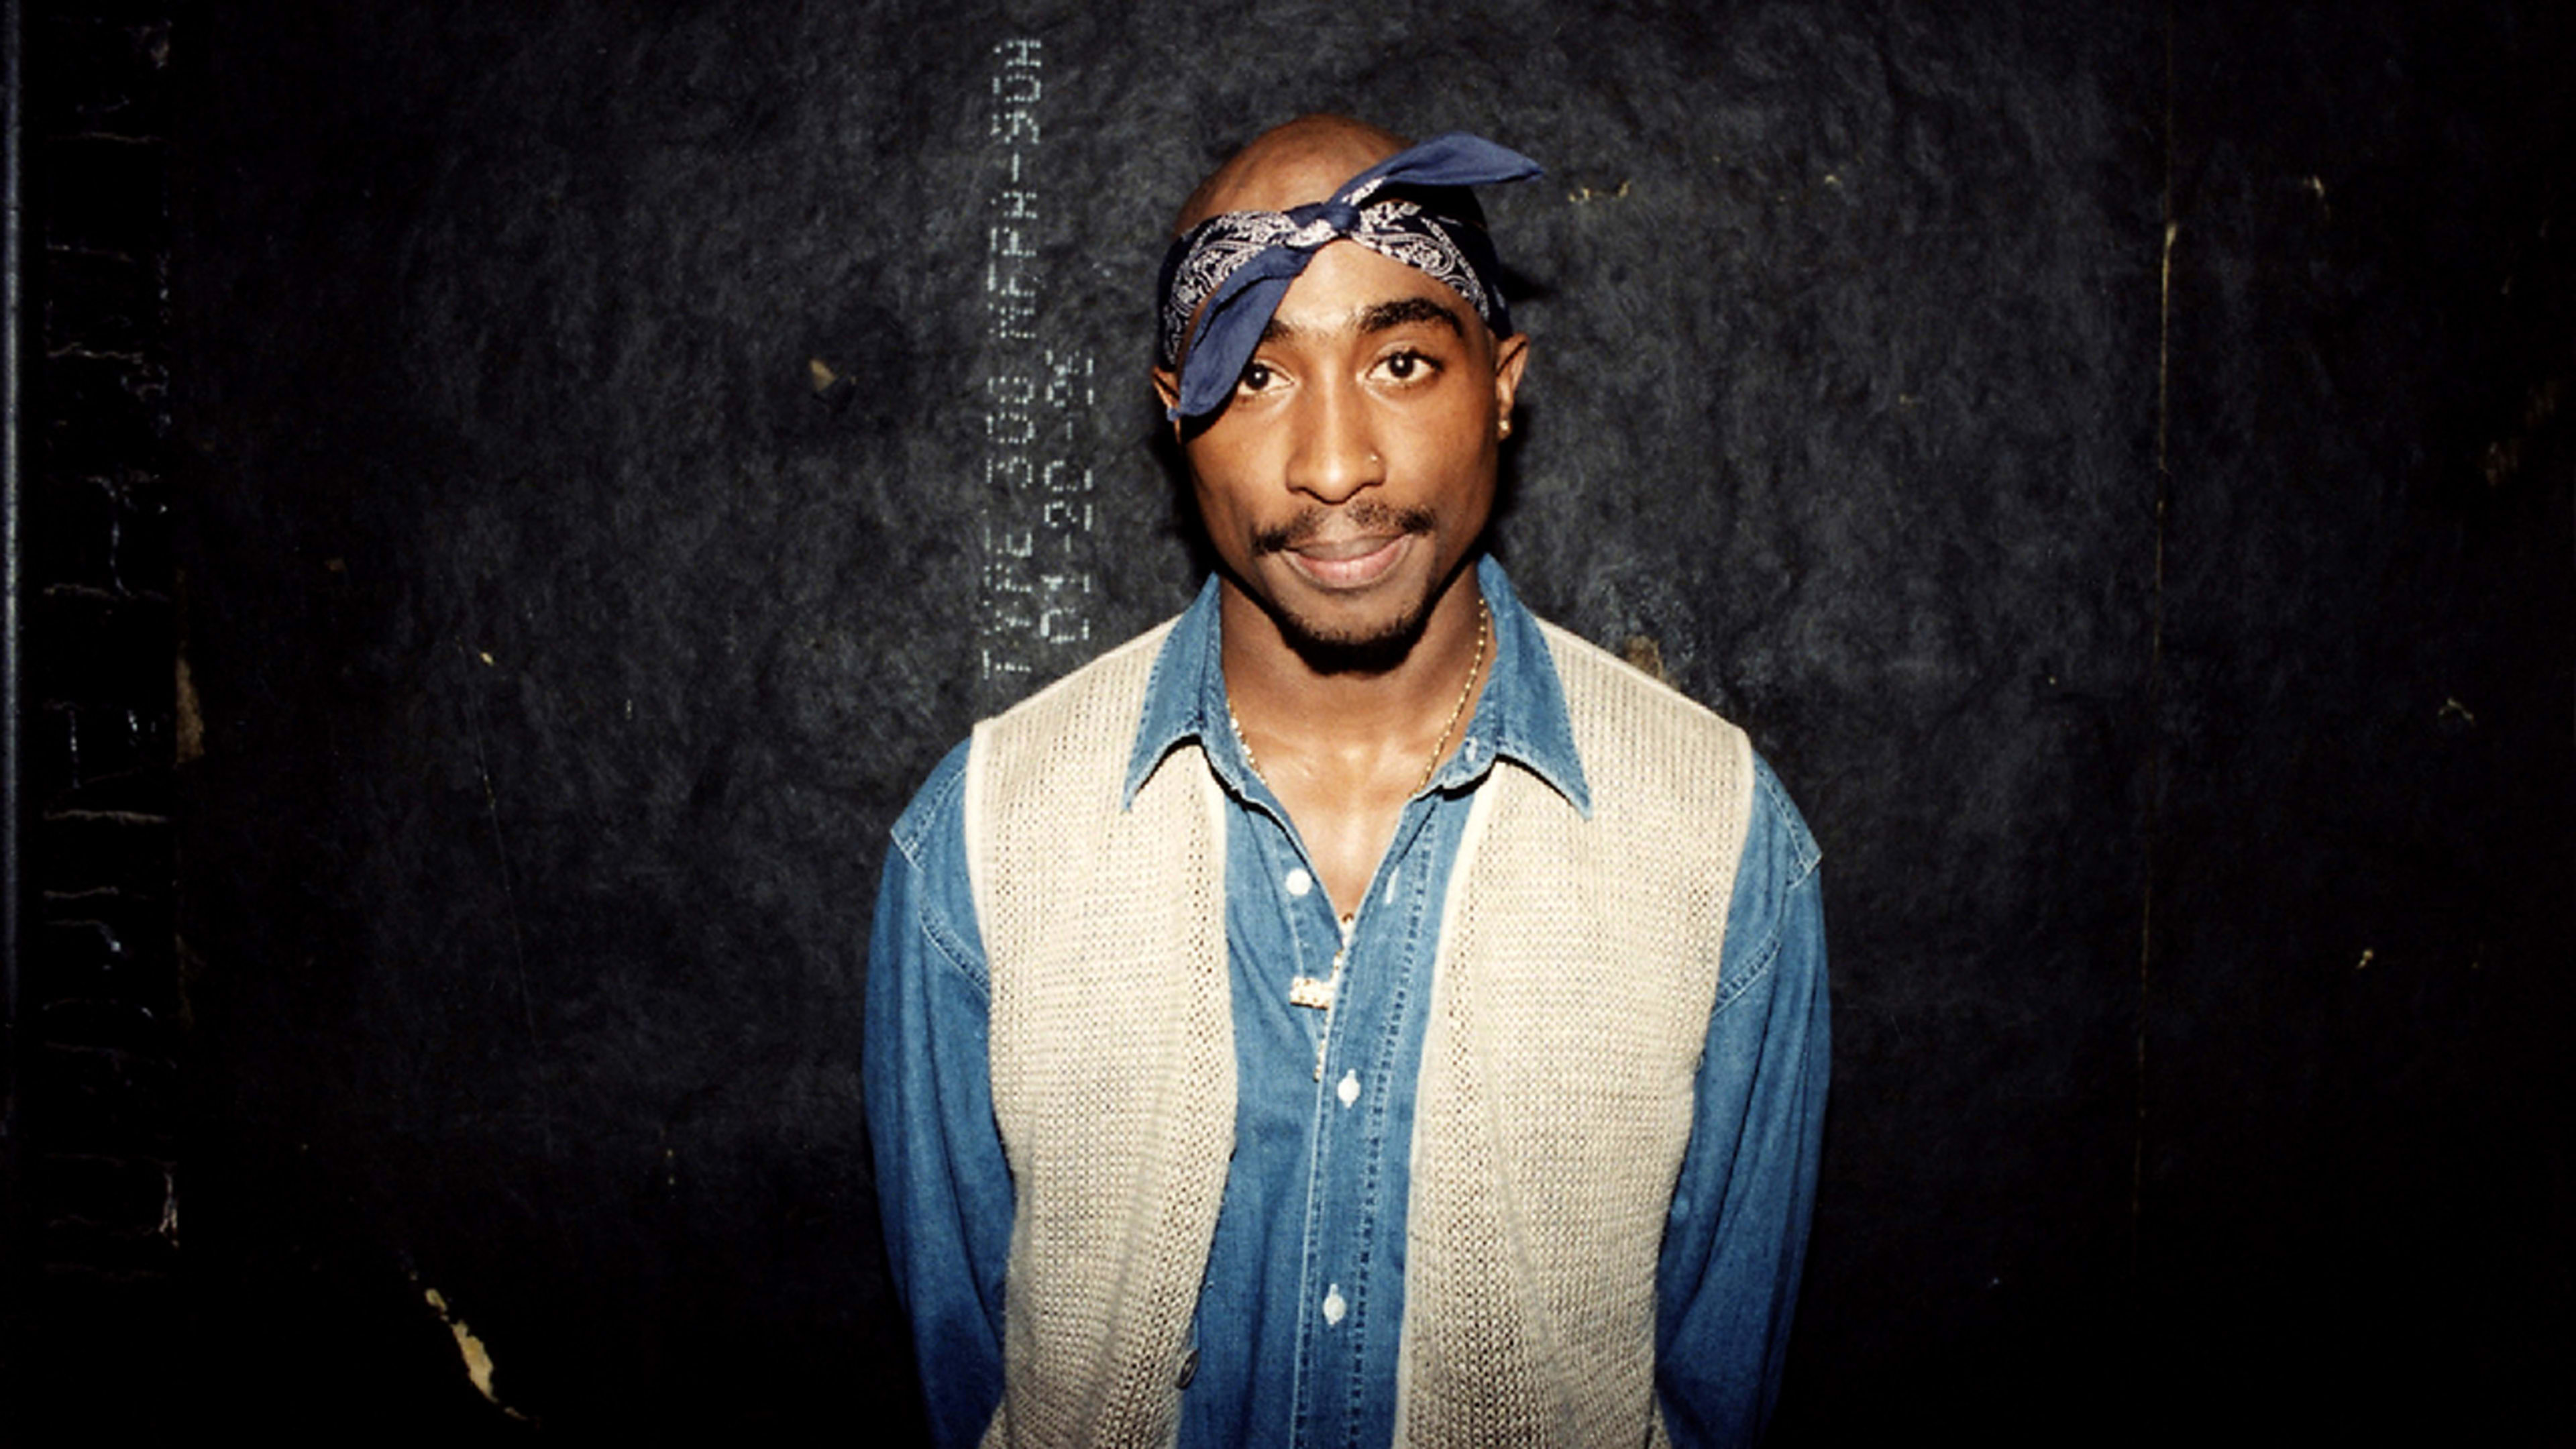 Imagine loving Tupac so much you get fired for it, like this 66-year-old man